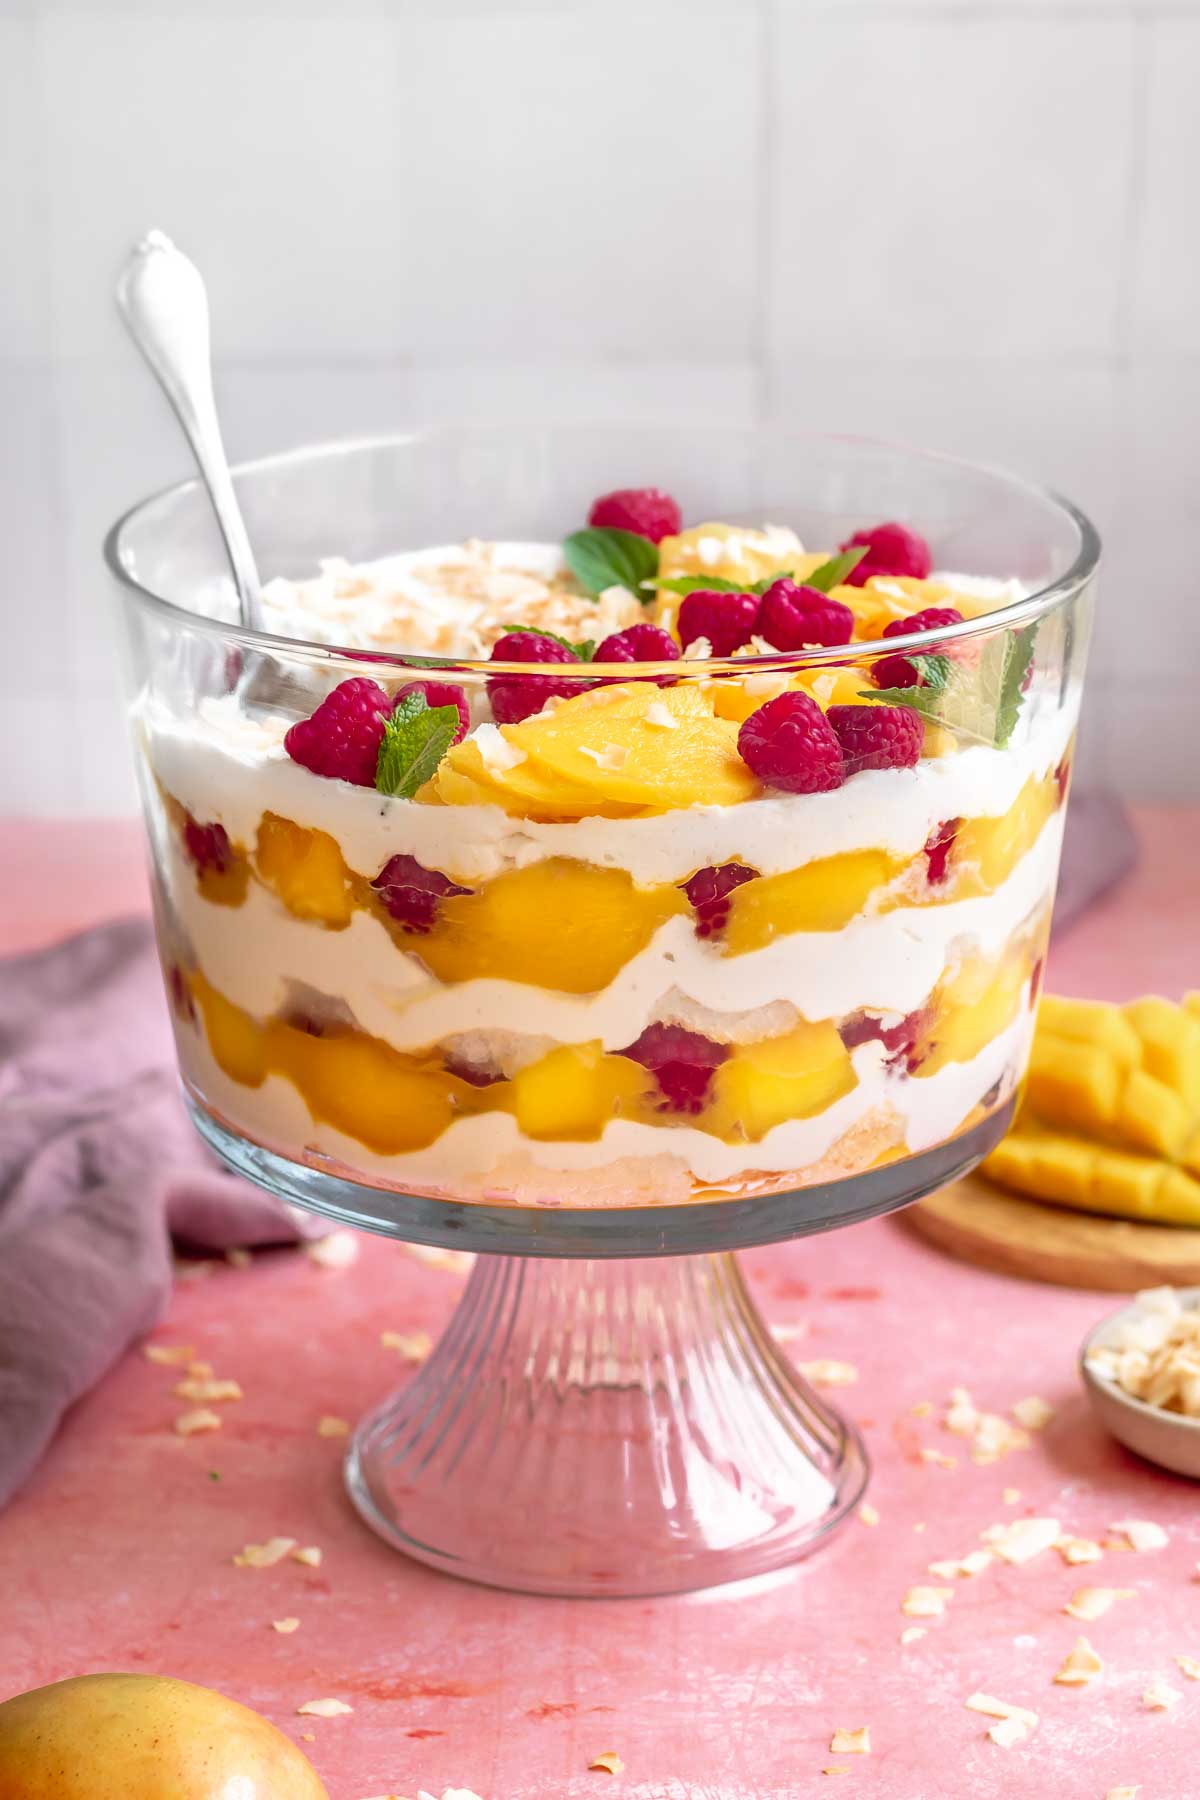 Mango trifle with a spoon it is showing the layers on the sides.